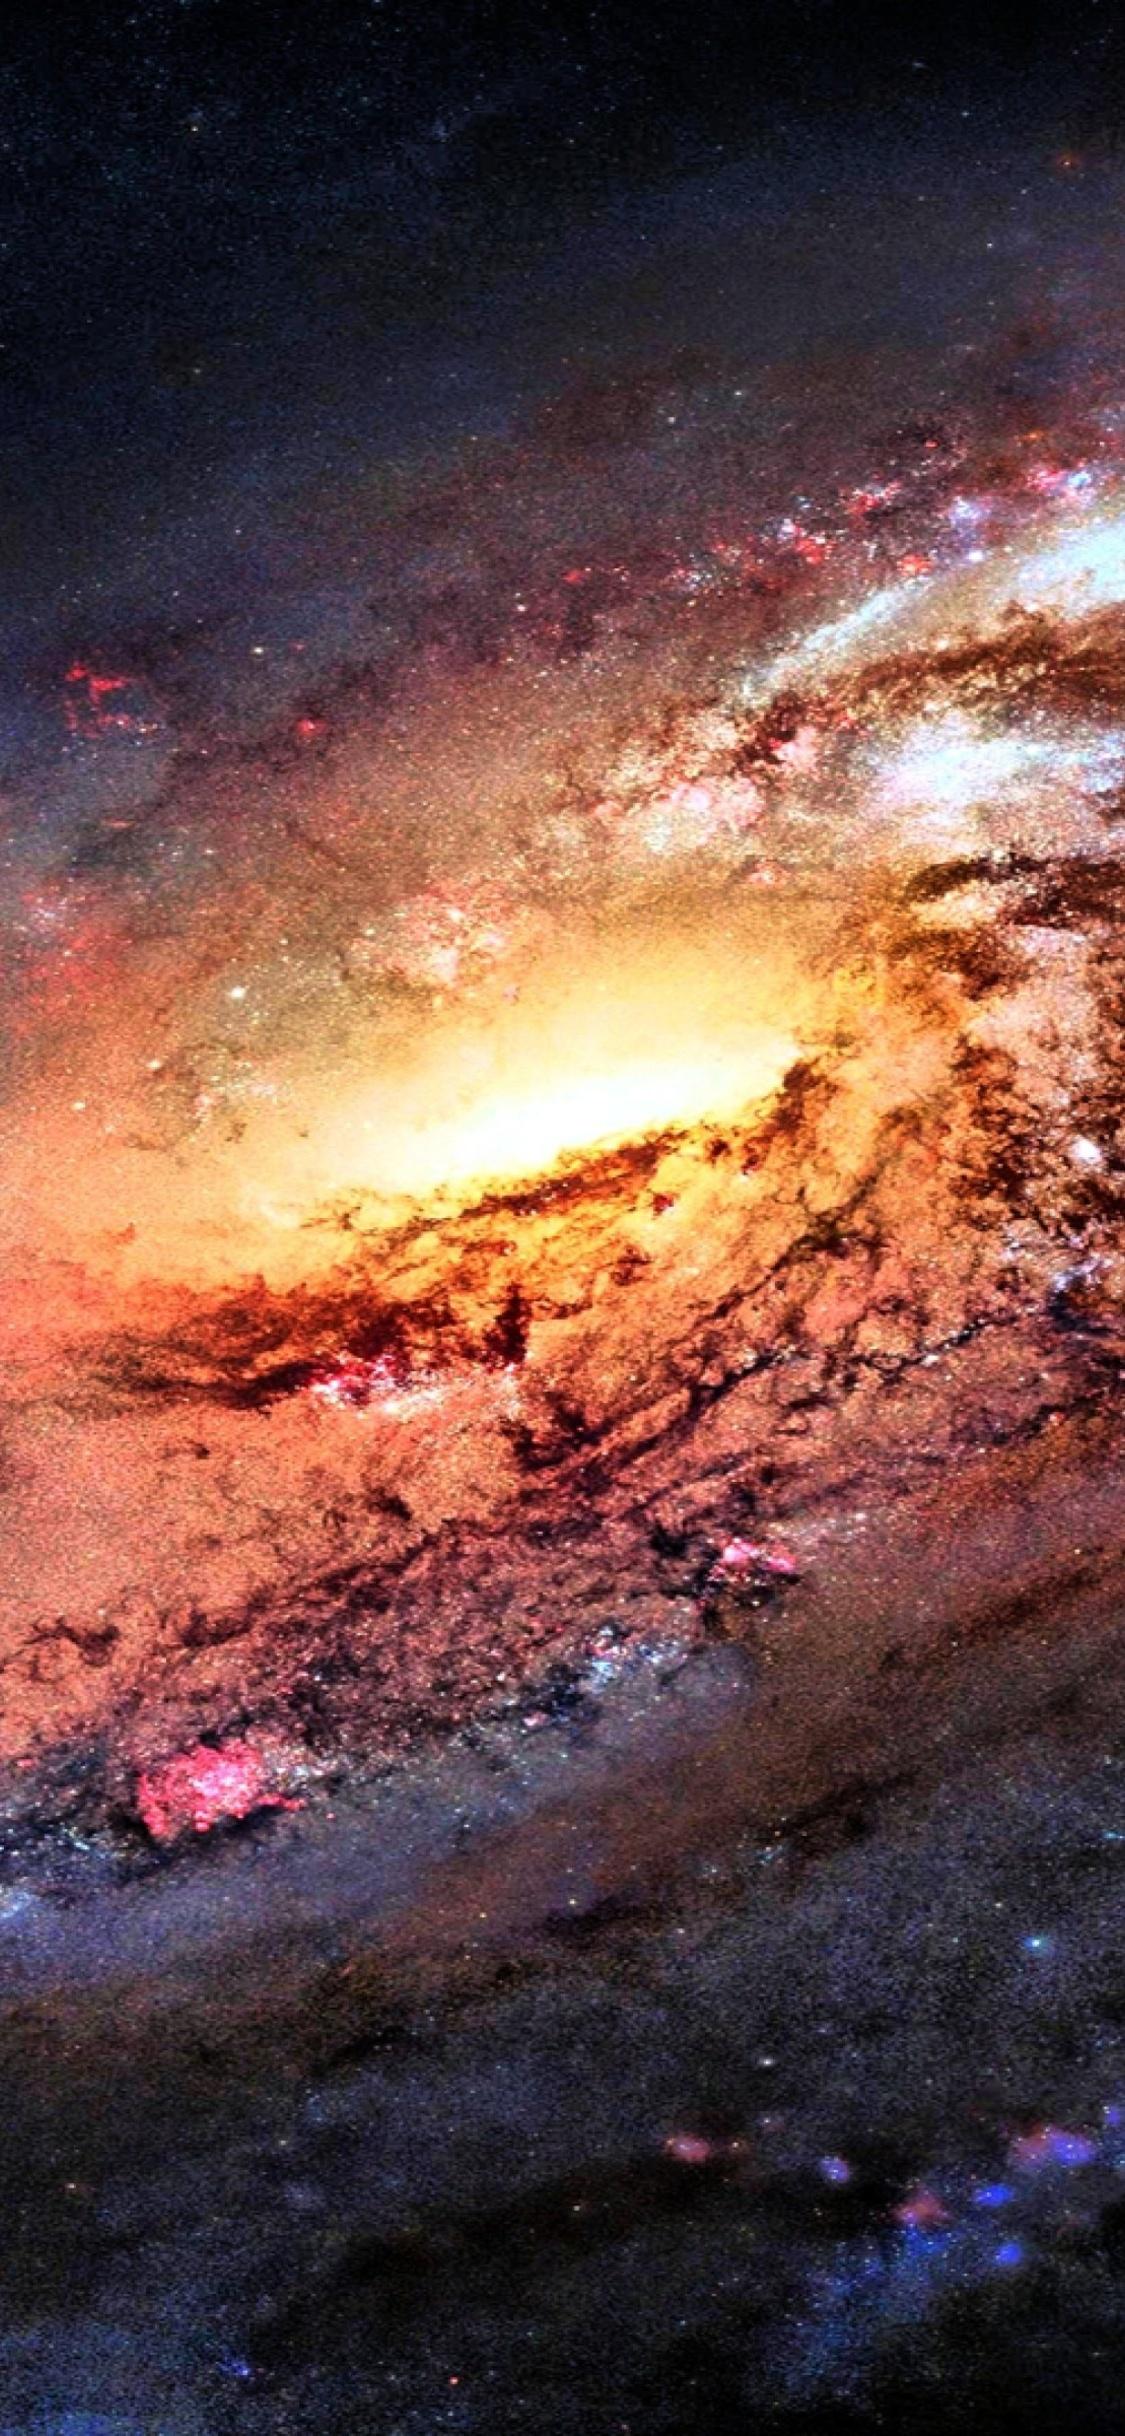 Galaxy Space Iphone Wallpapers Top Free Galaxy Space Iphone Backgrounds Wallpaperaccess 1919